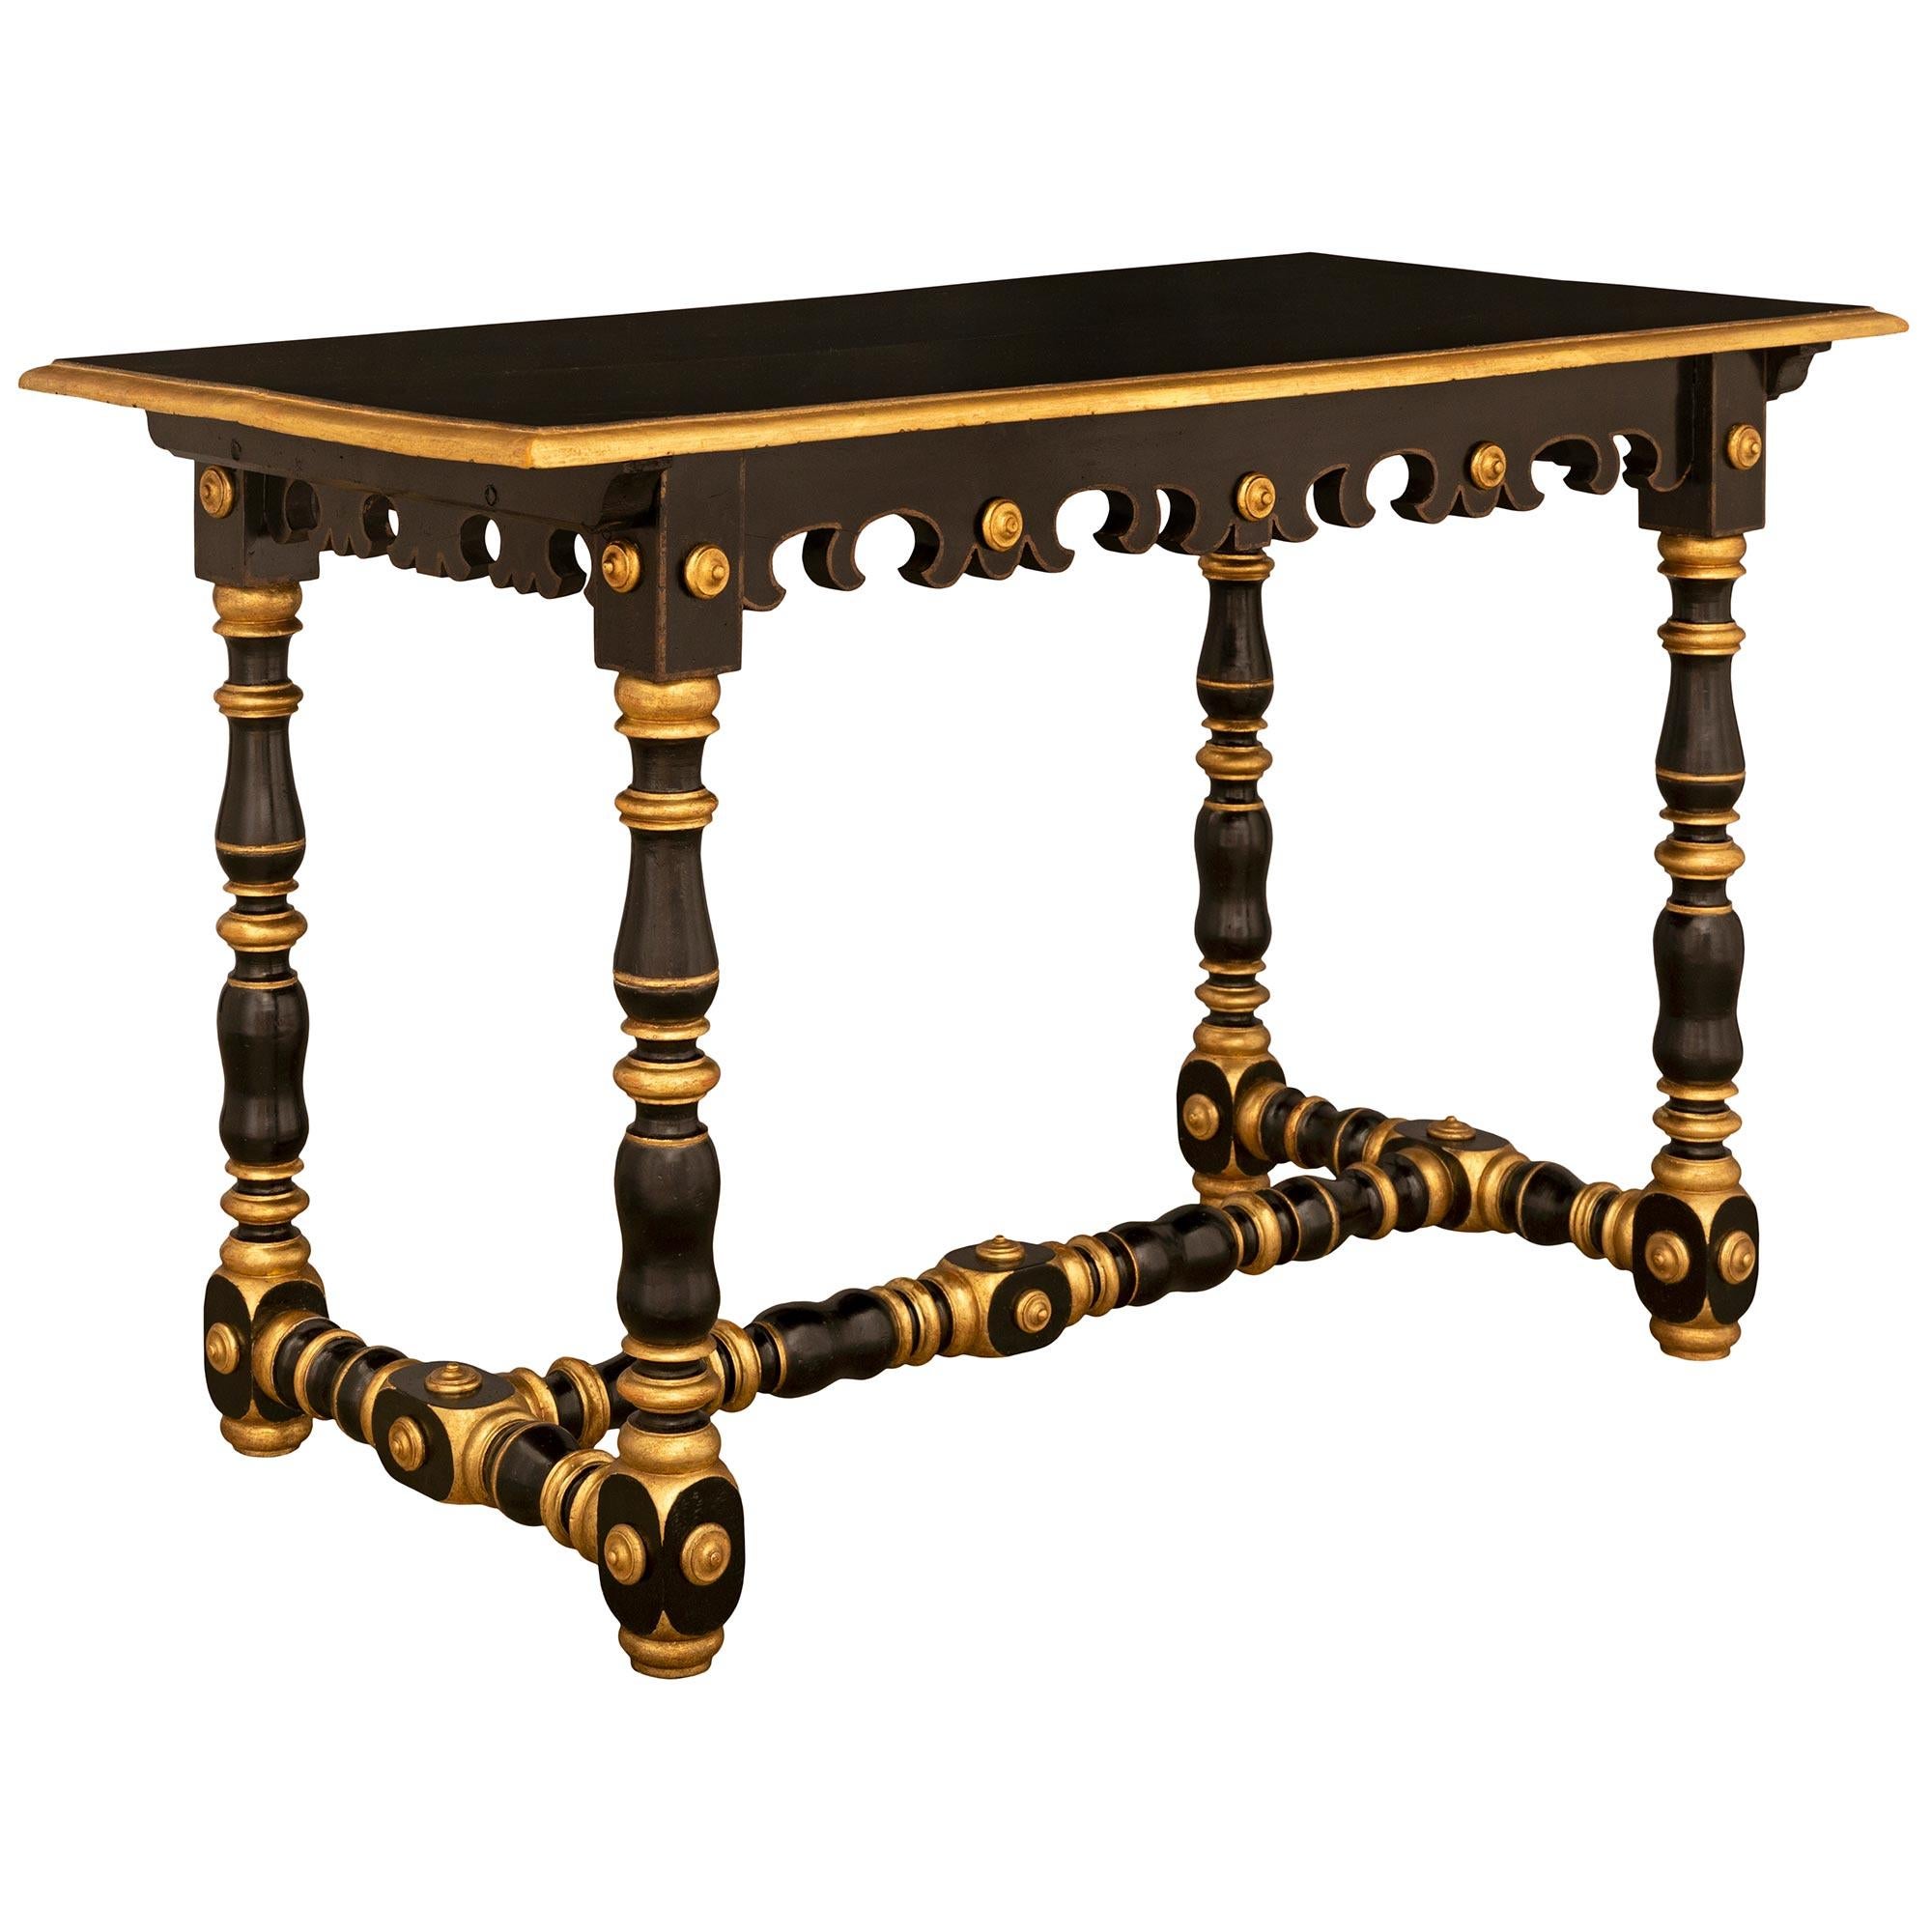 Ebonized Italian 18th Century Louis XIV Period Fruitwood & Giltwood Side/Center Table For Sale